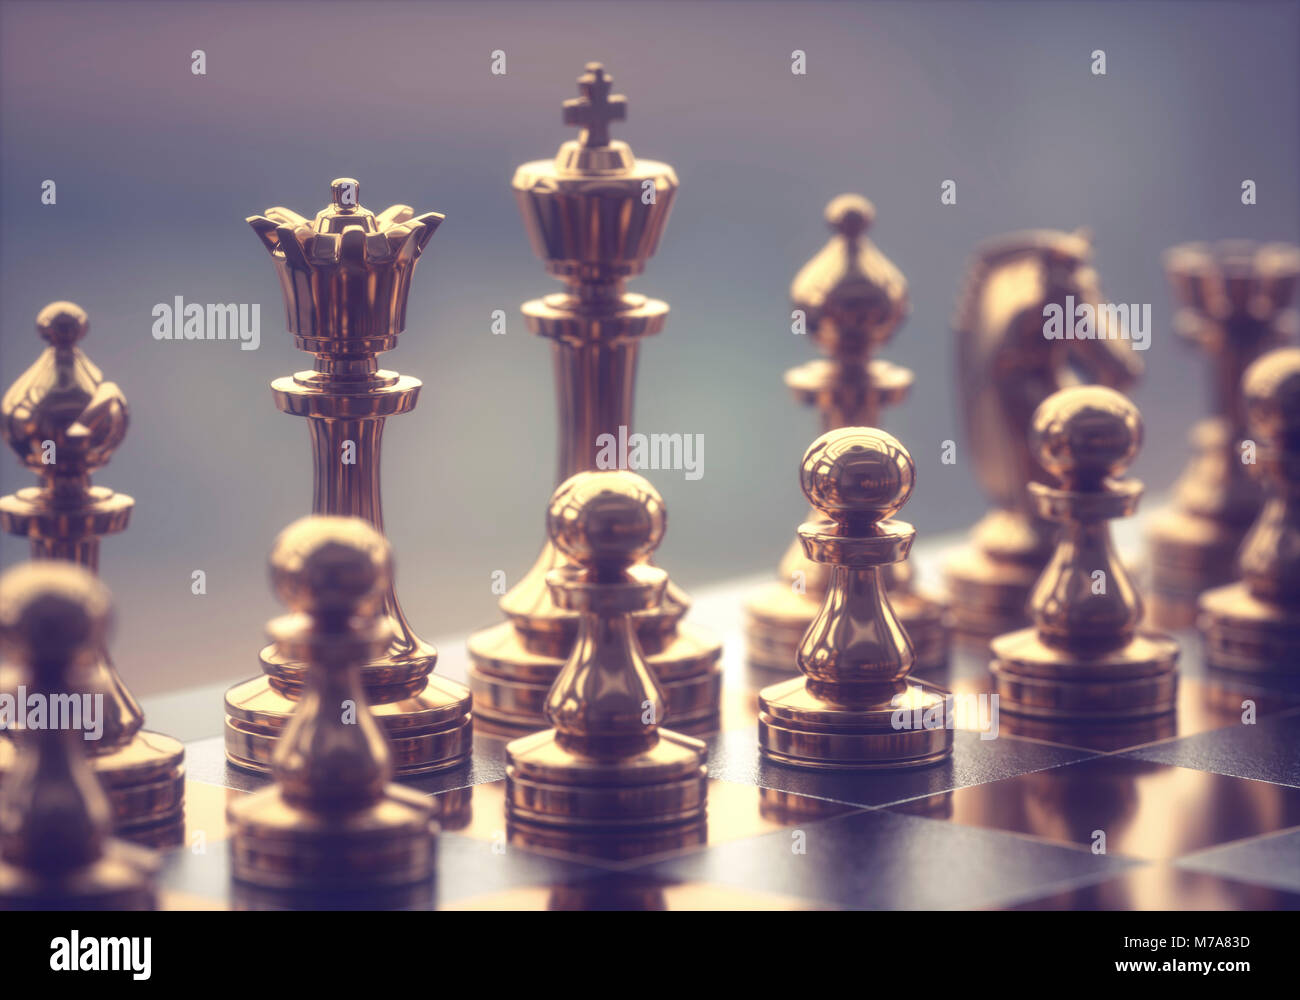 Chessboard With Chess Pieces Side View 3d Rendering Illustration Stock  Photo - Download Image Now - iStock